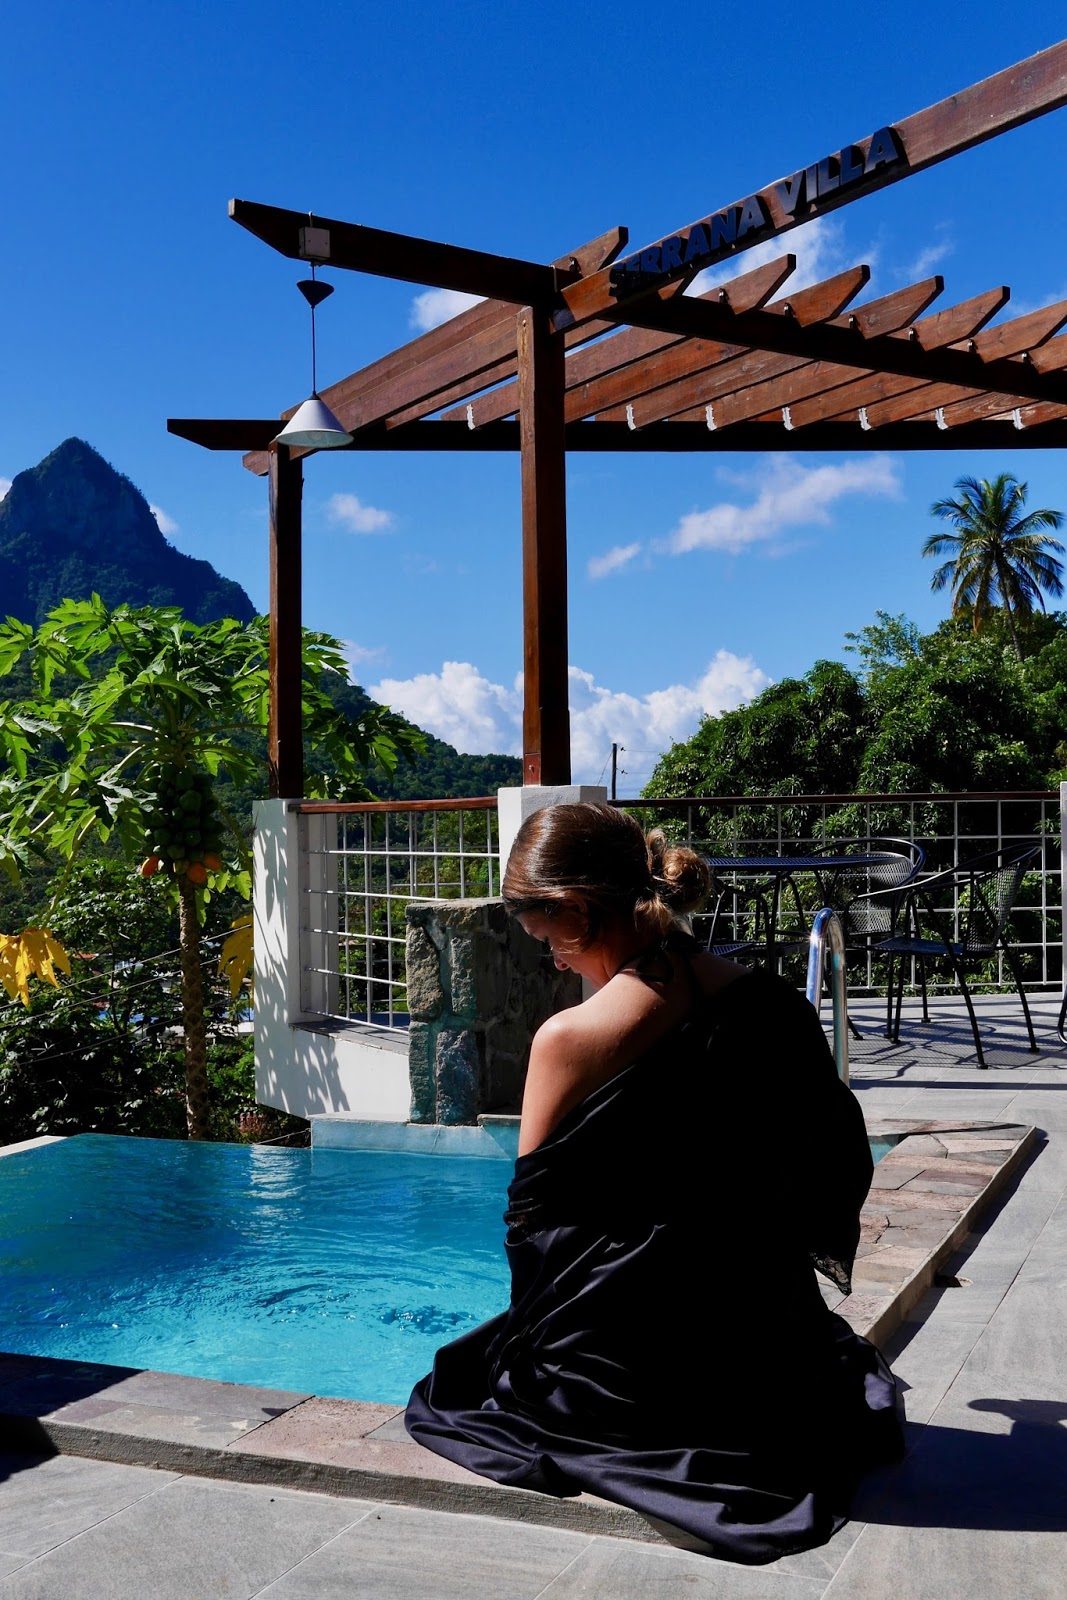 The best airbnb in the world looking onto the Piton Mountains, Soufrière, Saint Lucia, review by www.CalMcTravels.com, Cal McTravels